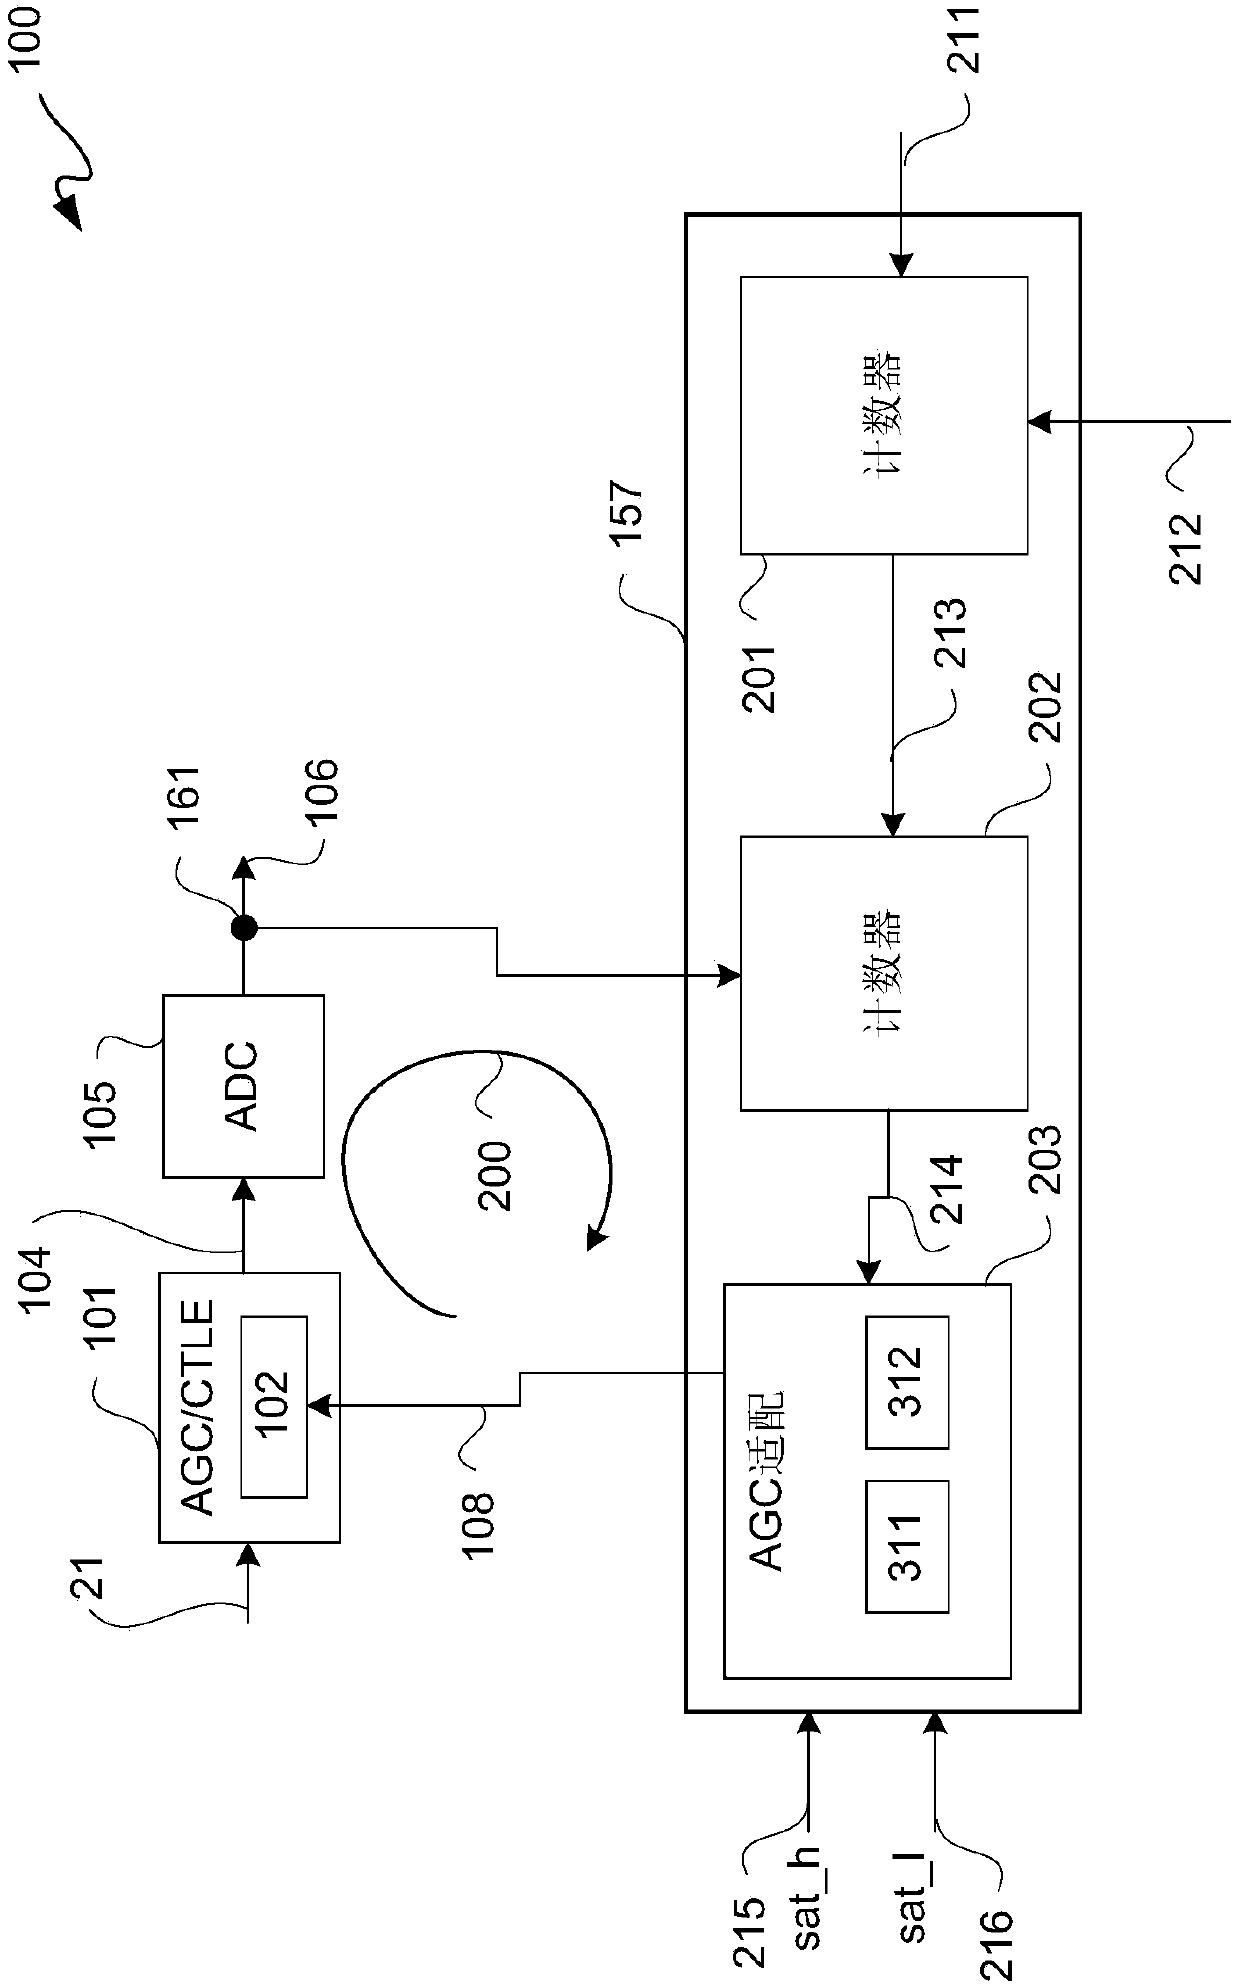 Channel adaptive adc-based receiver